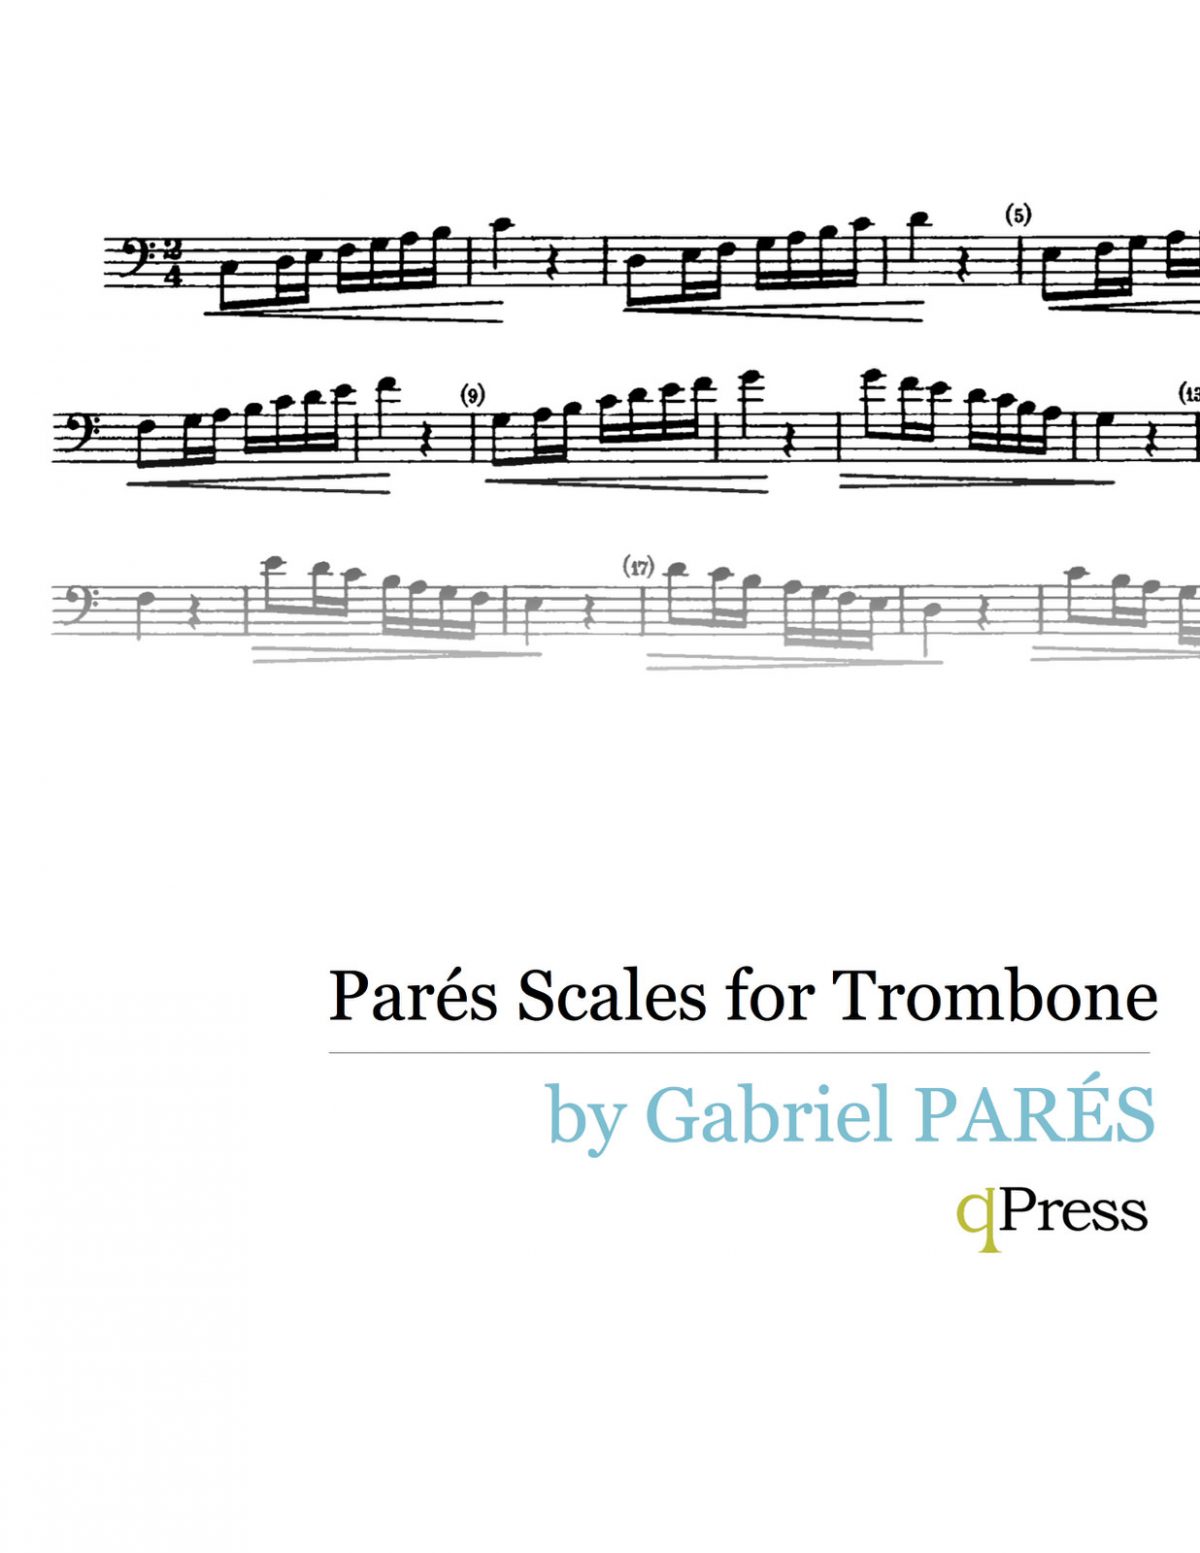 Pares, Scales for Trombone